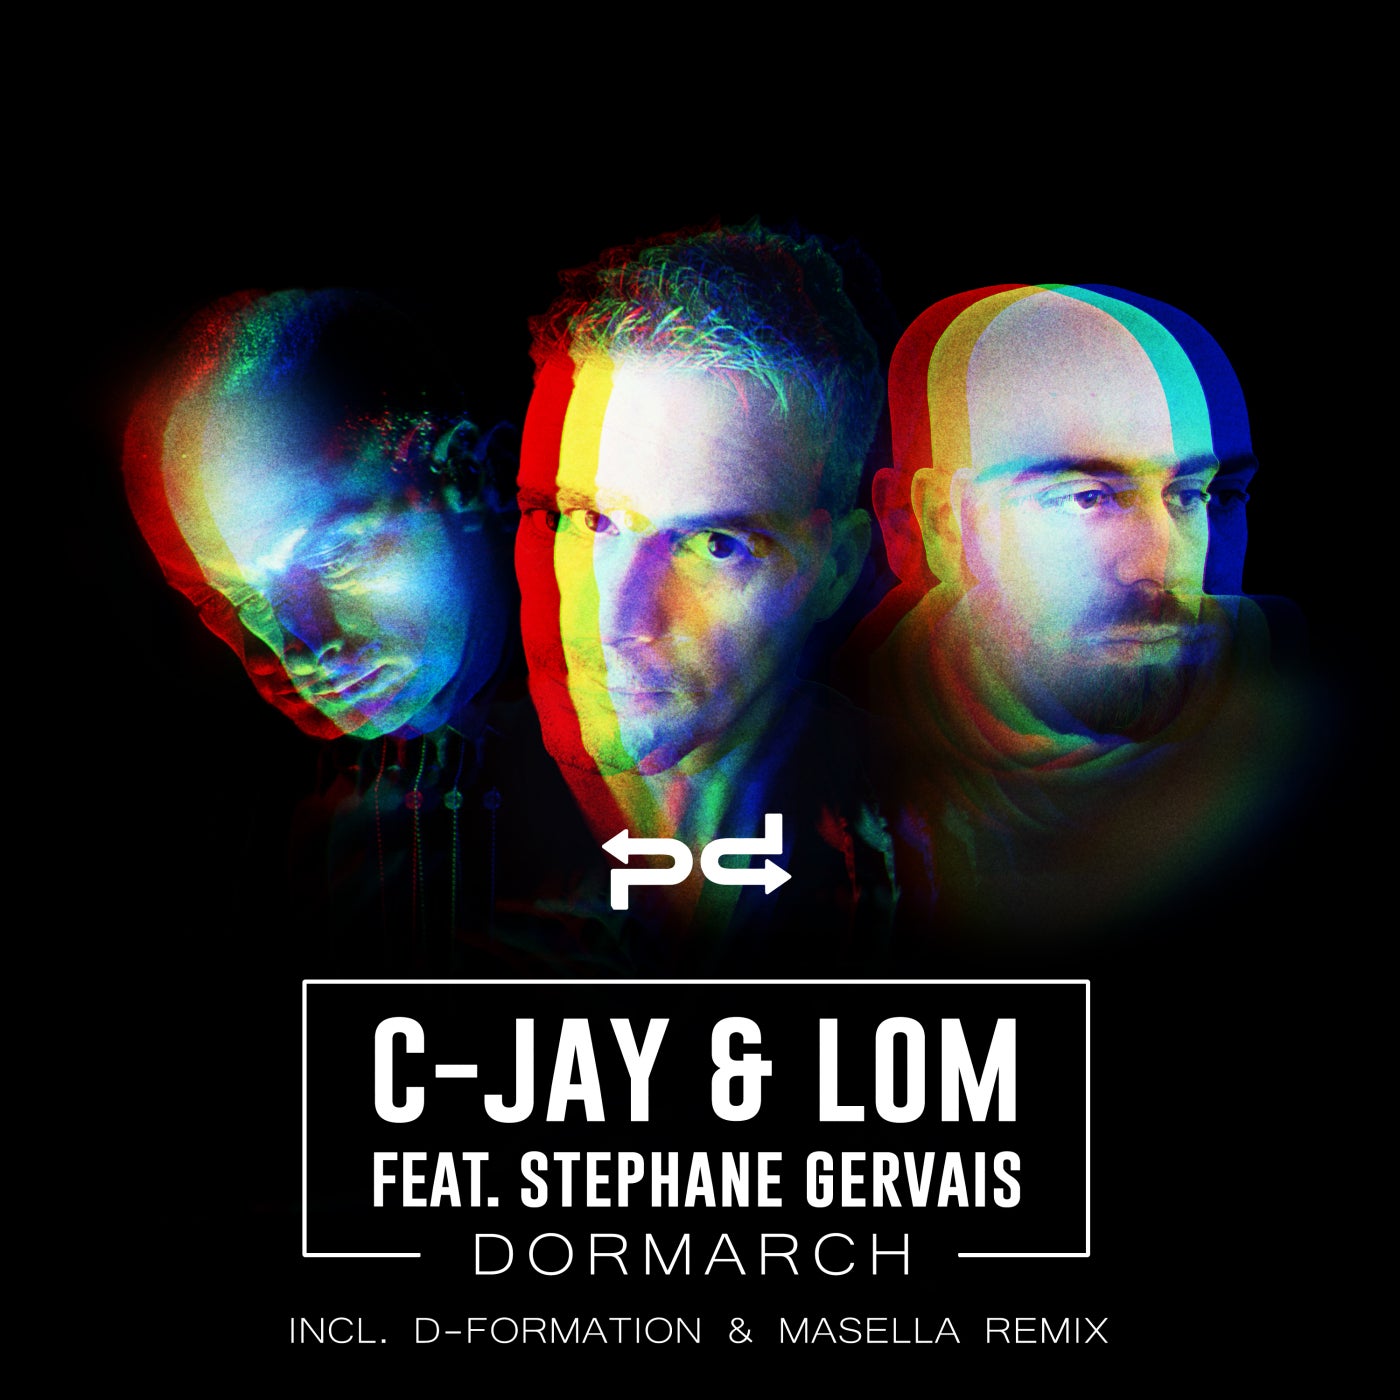 C-Jay & LOM (AR) feat. Stephane Gervais - Dormarch (D-Formation & Masella Remix)